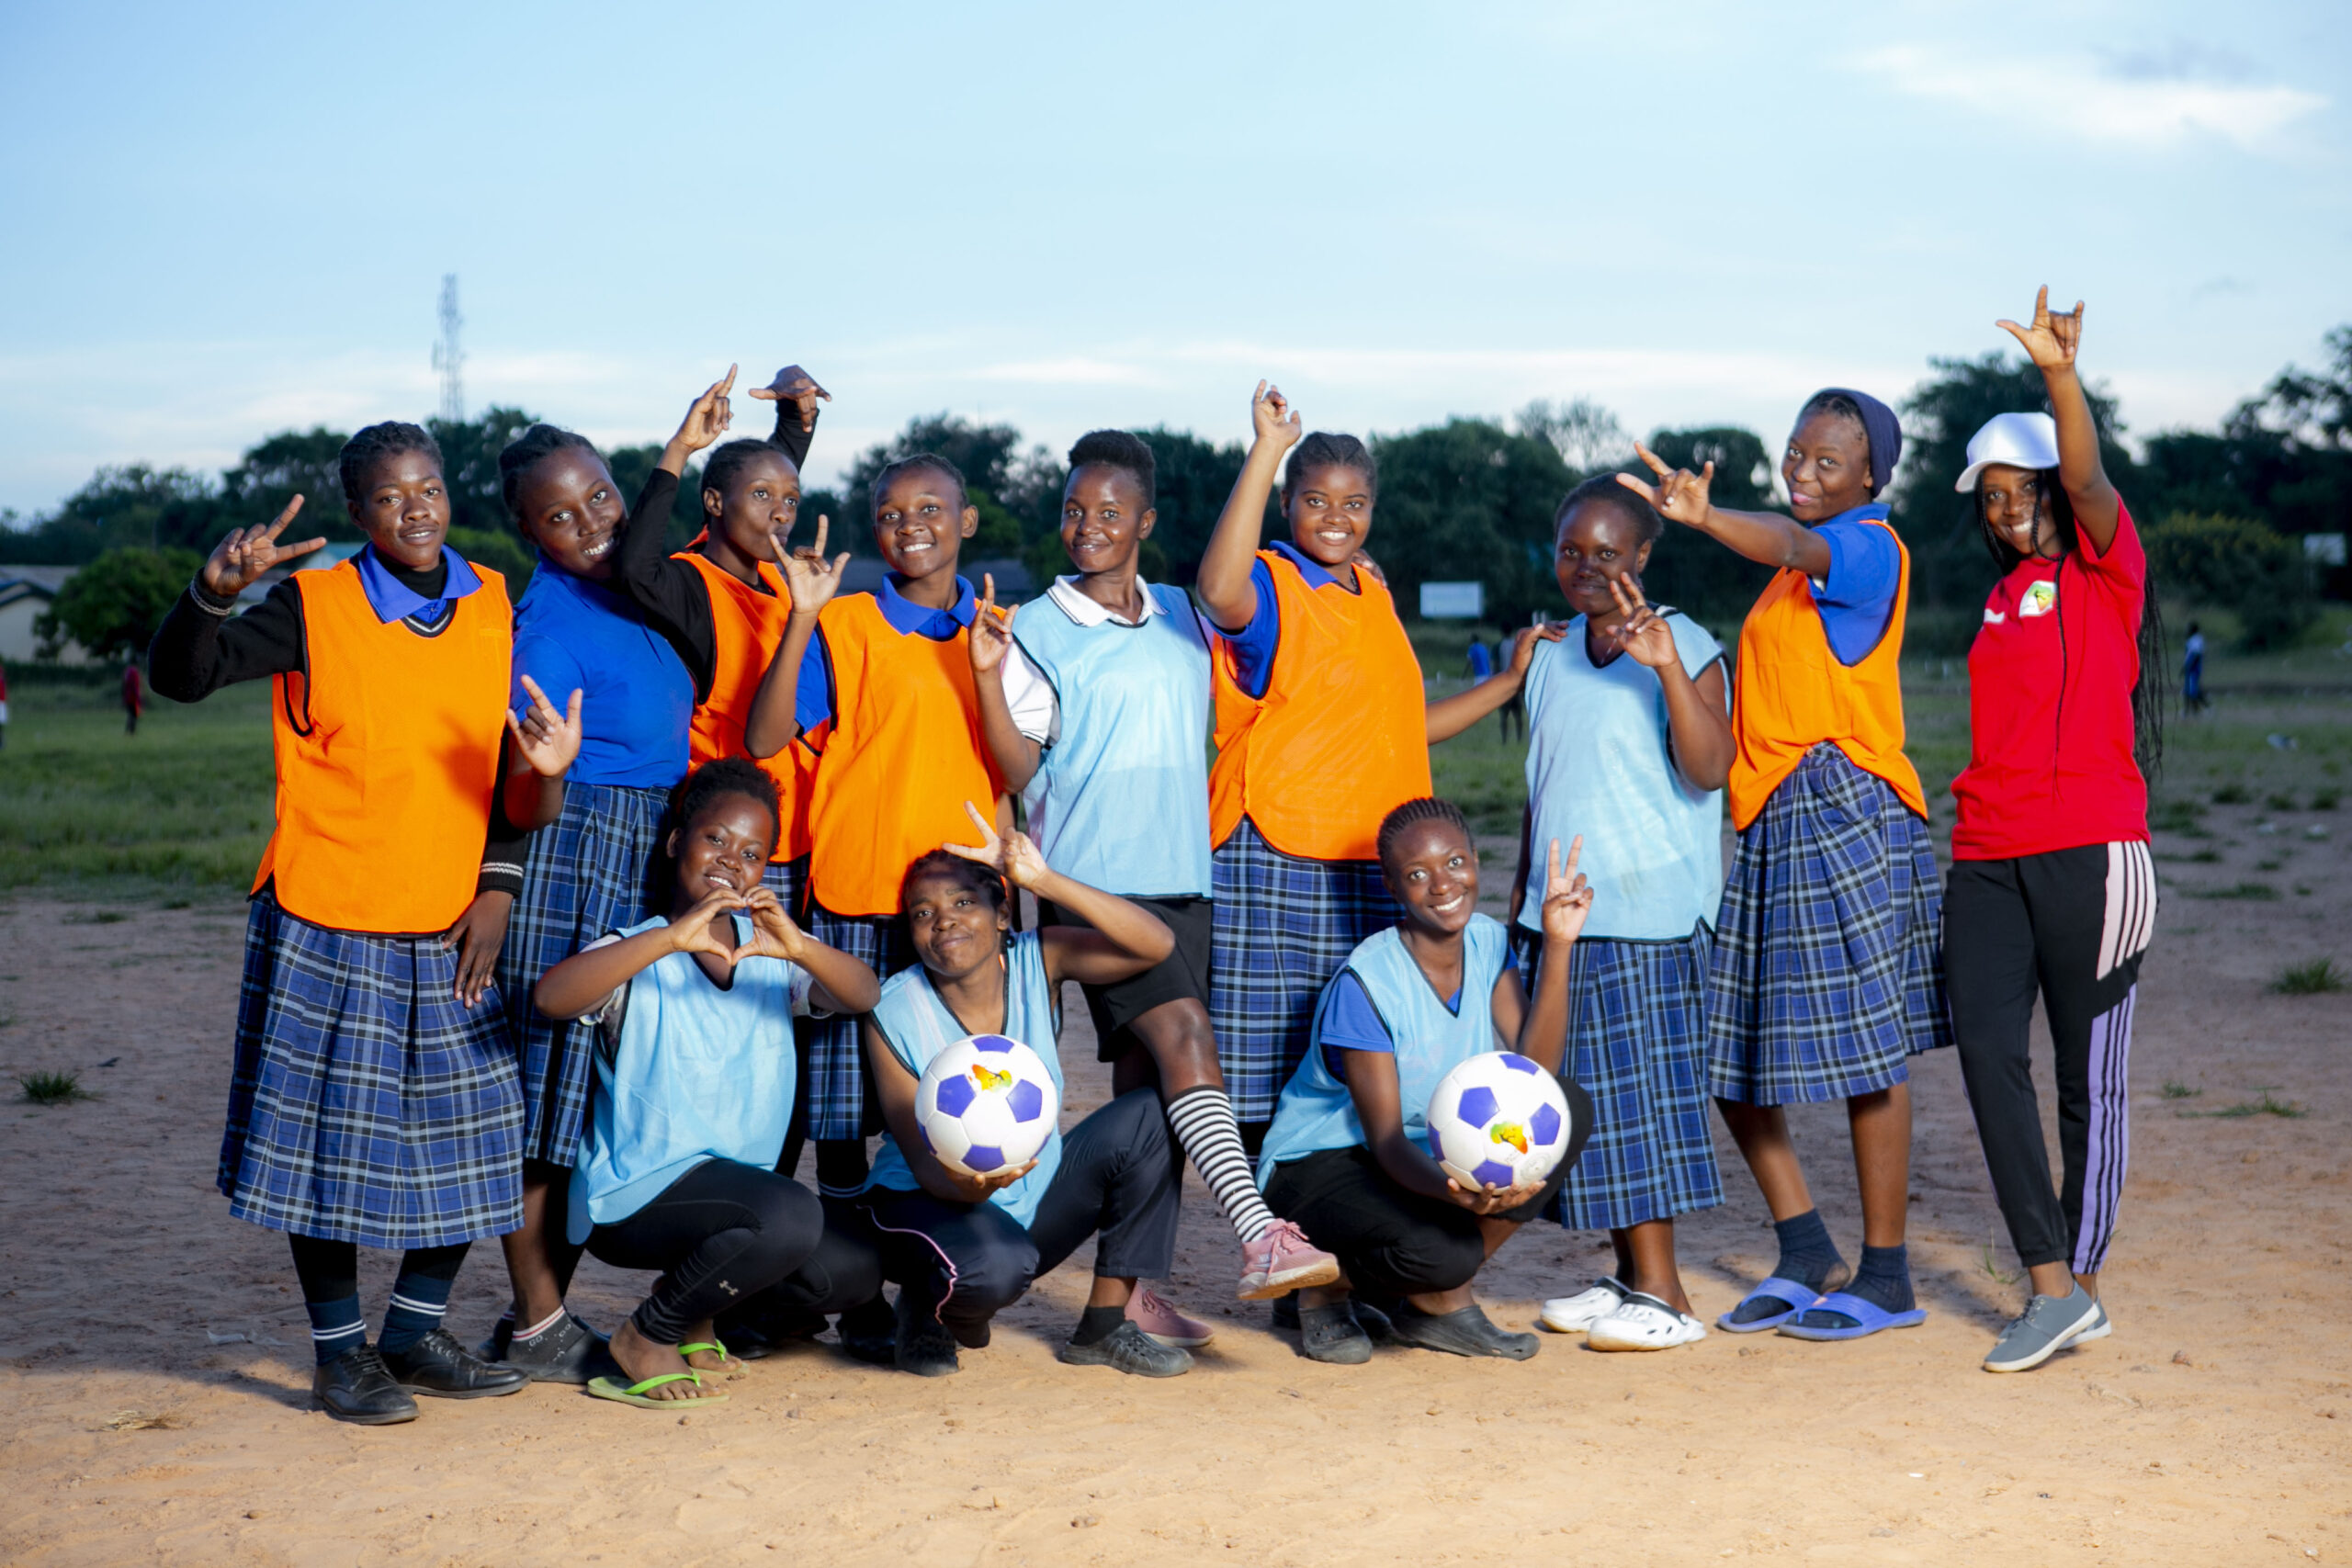 Levelling the playing field: how football can help educate deaf adolescents on sexual health